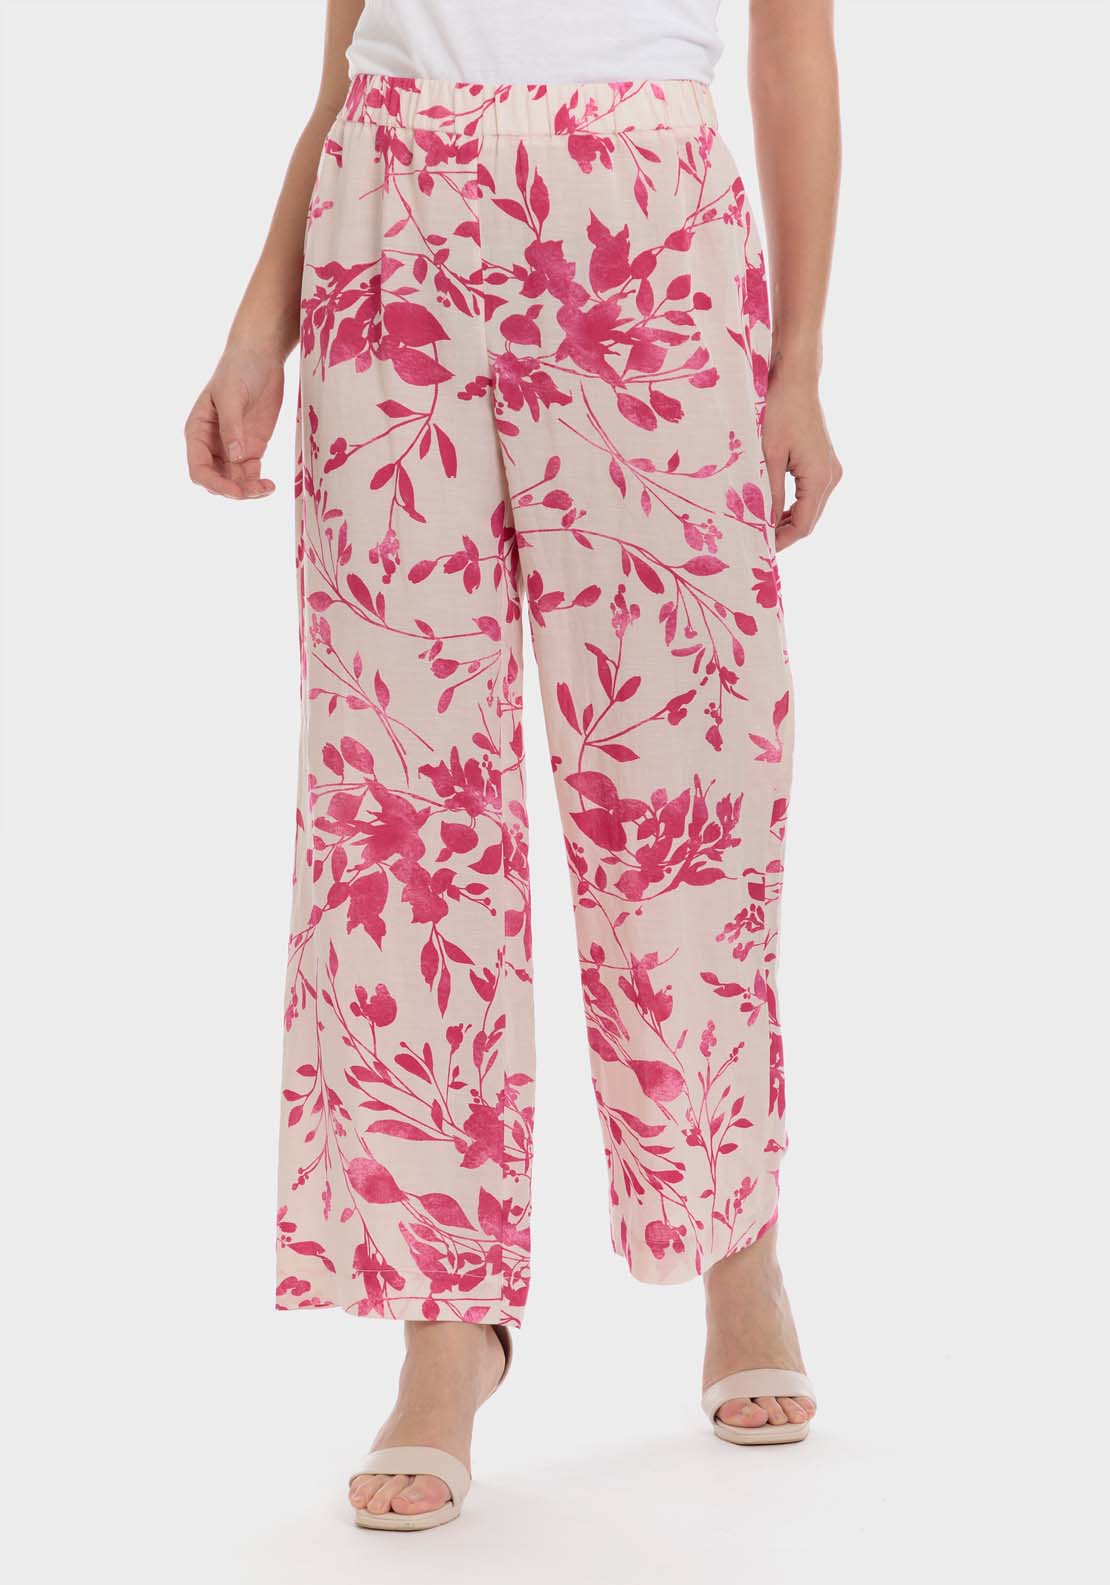 Punt Roma Printed Linen Trouser - Pink 2 Shaws Department Stores